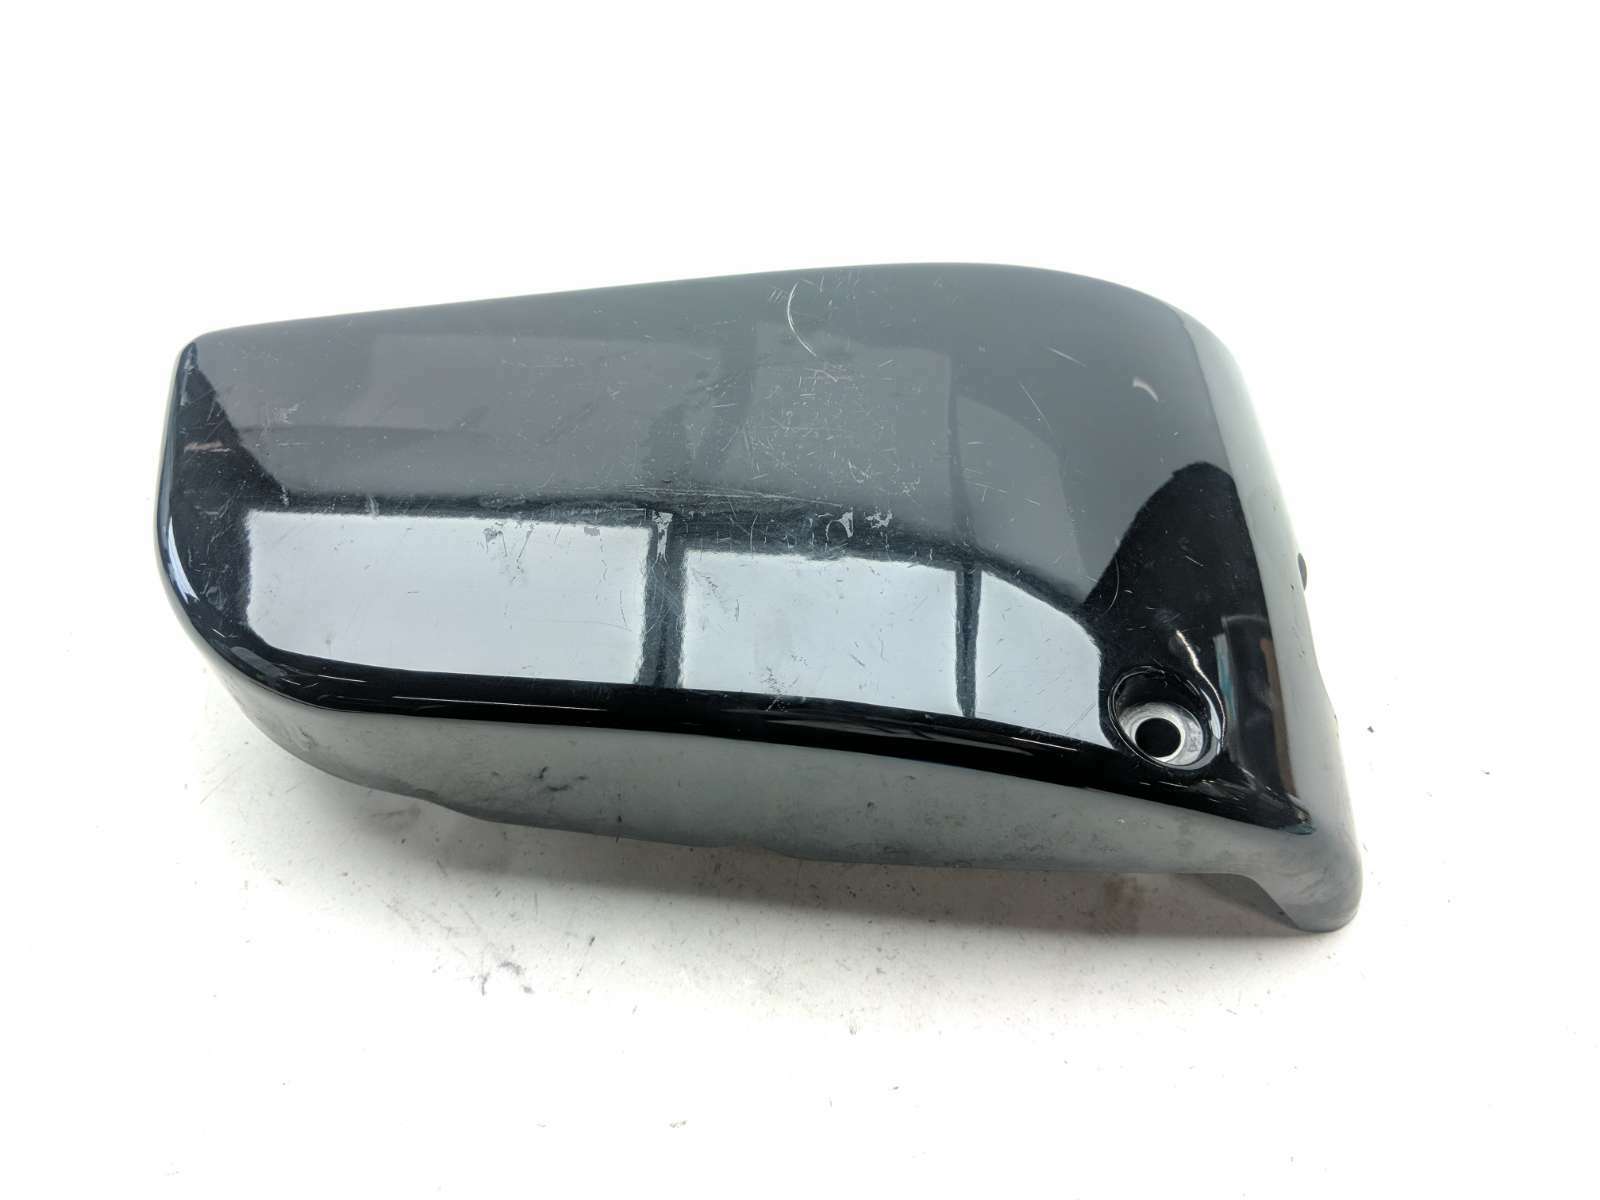 02 Kawasaki VN1500 Vulcan Nomad Right Side Lower Cover Panel